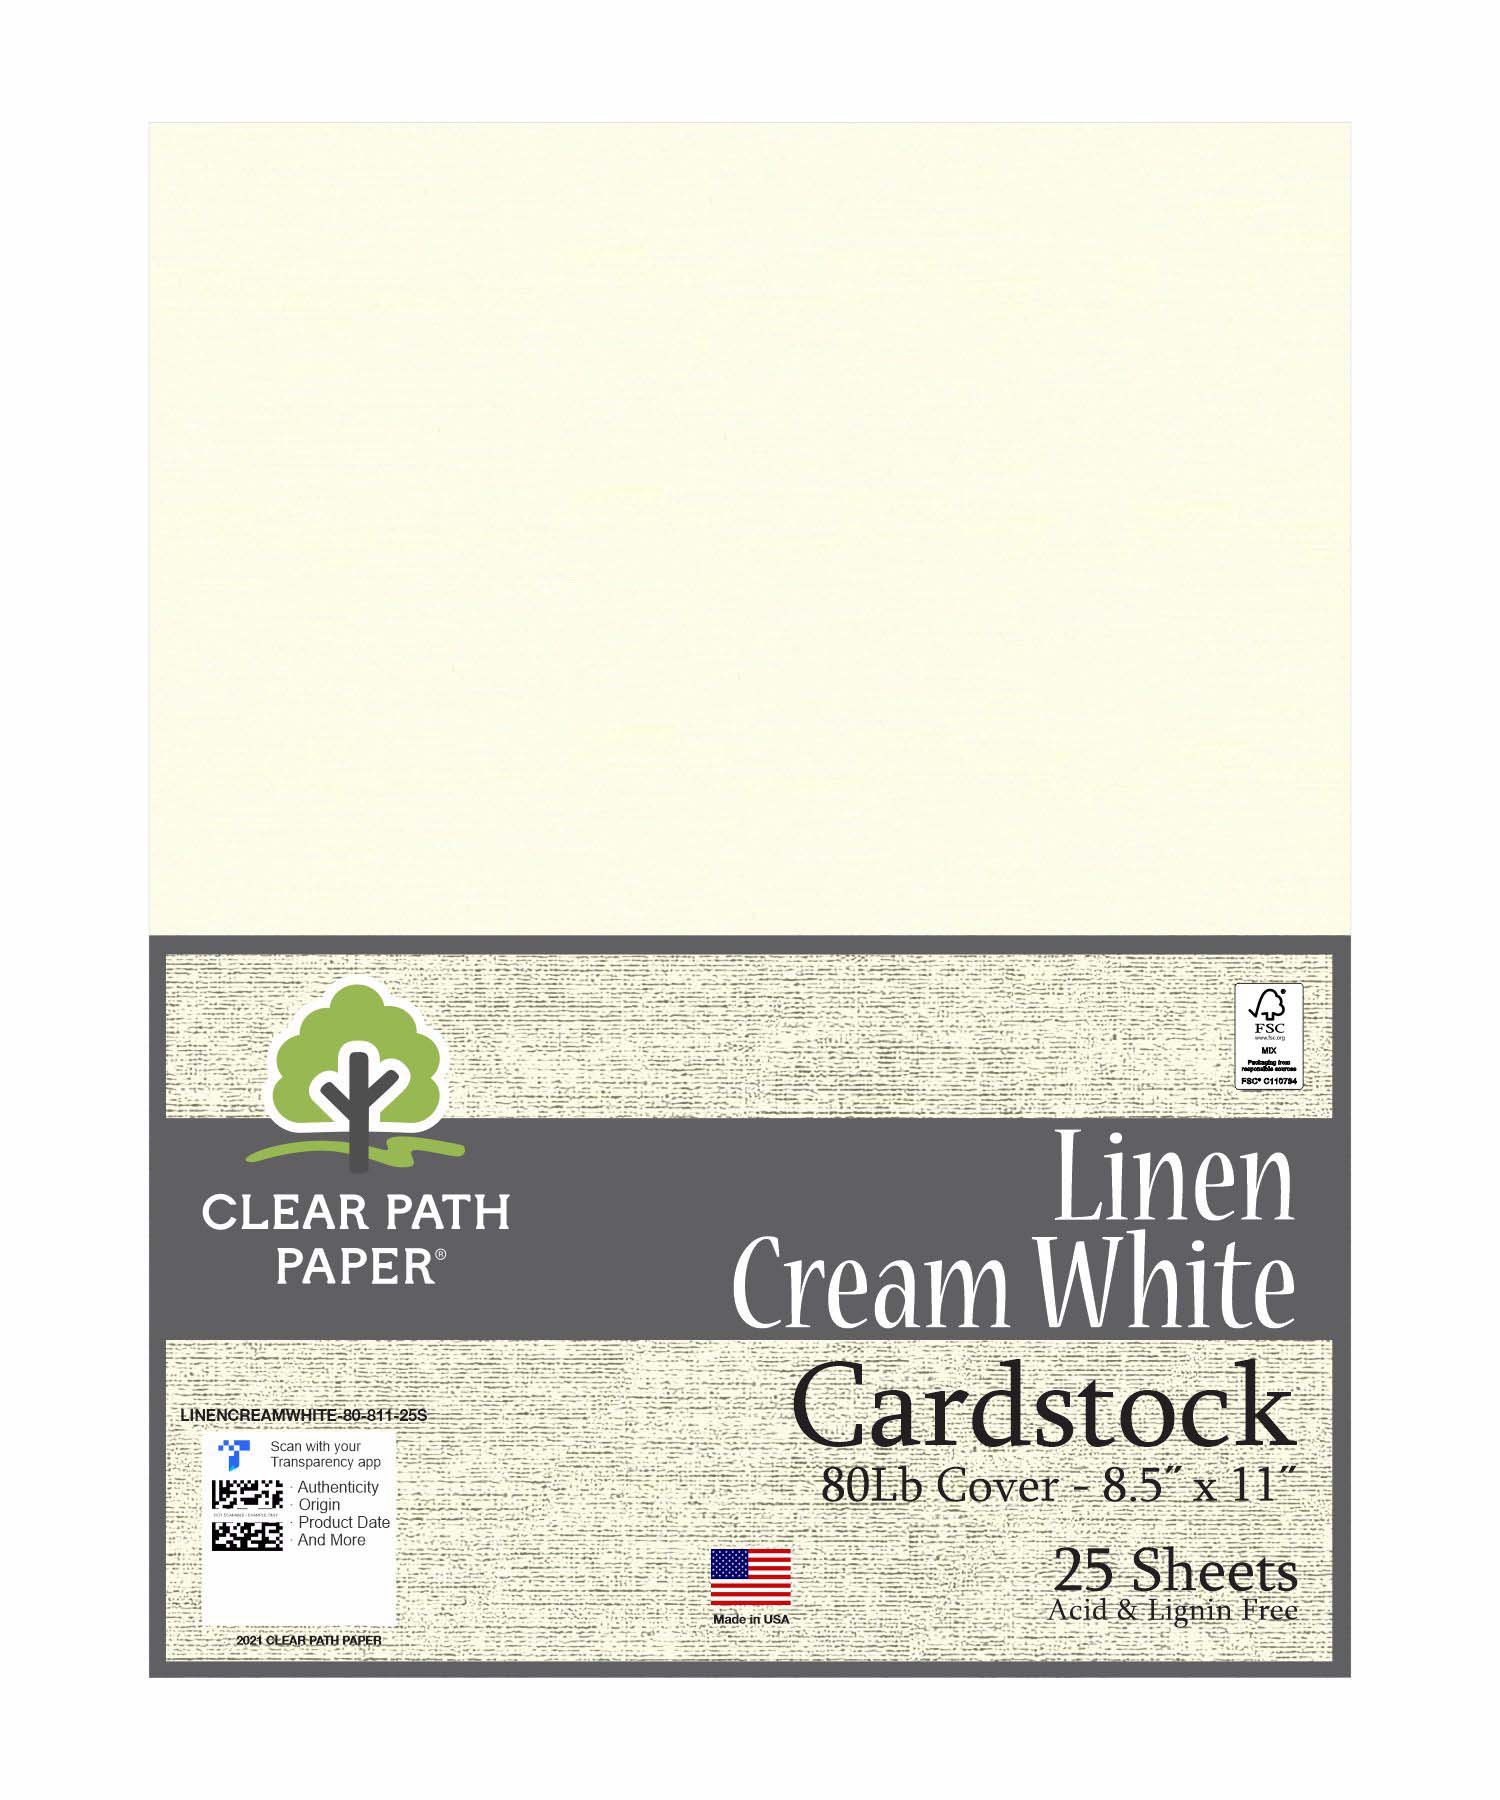 Cream White Linen Cardstock - 8.5 x 11 inch - 80lb Cover - 25 Sheets - Clear Path Paper